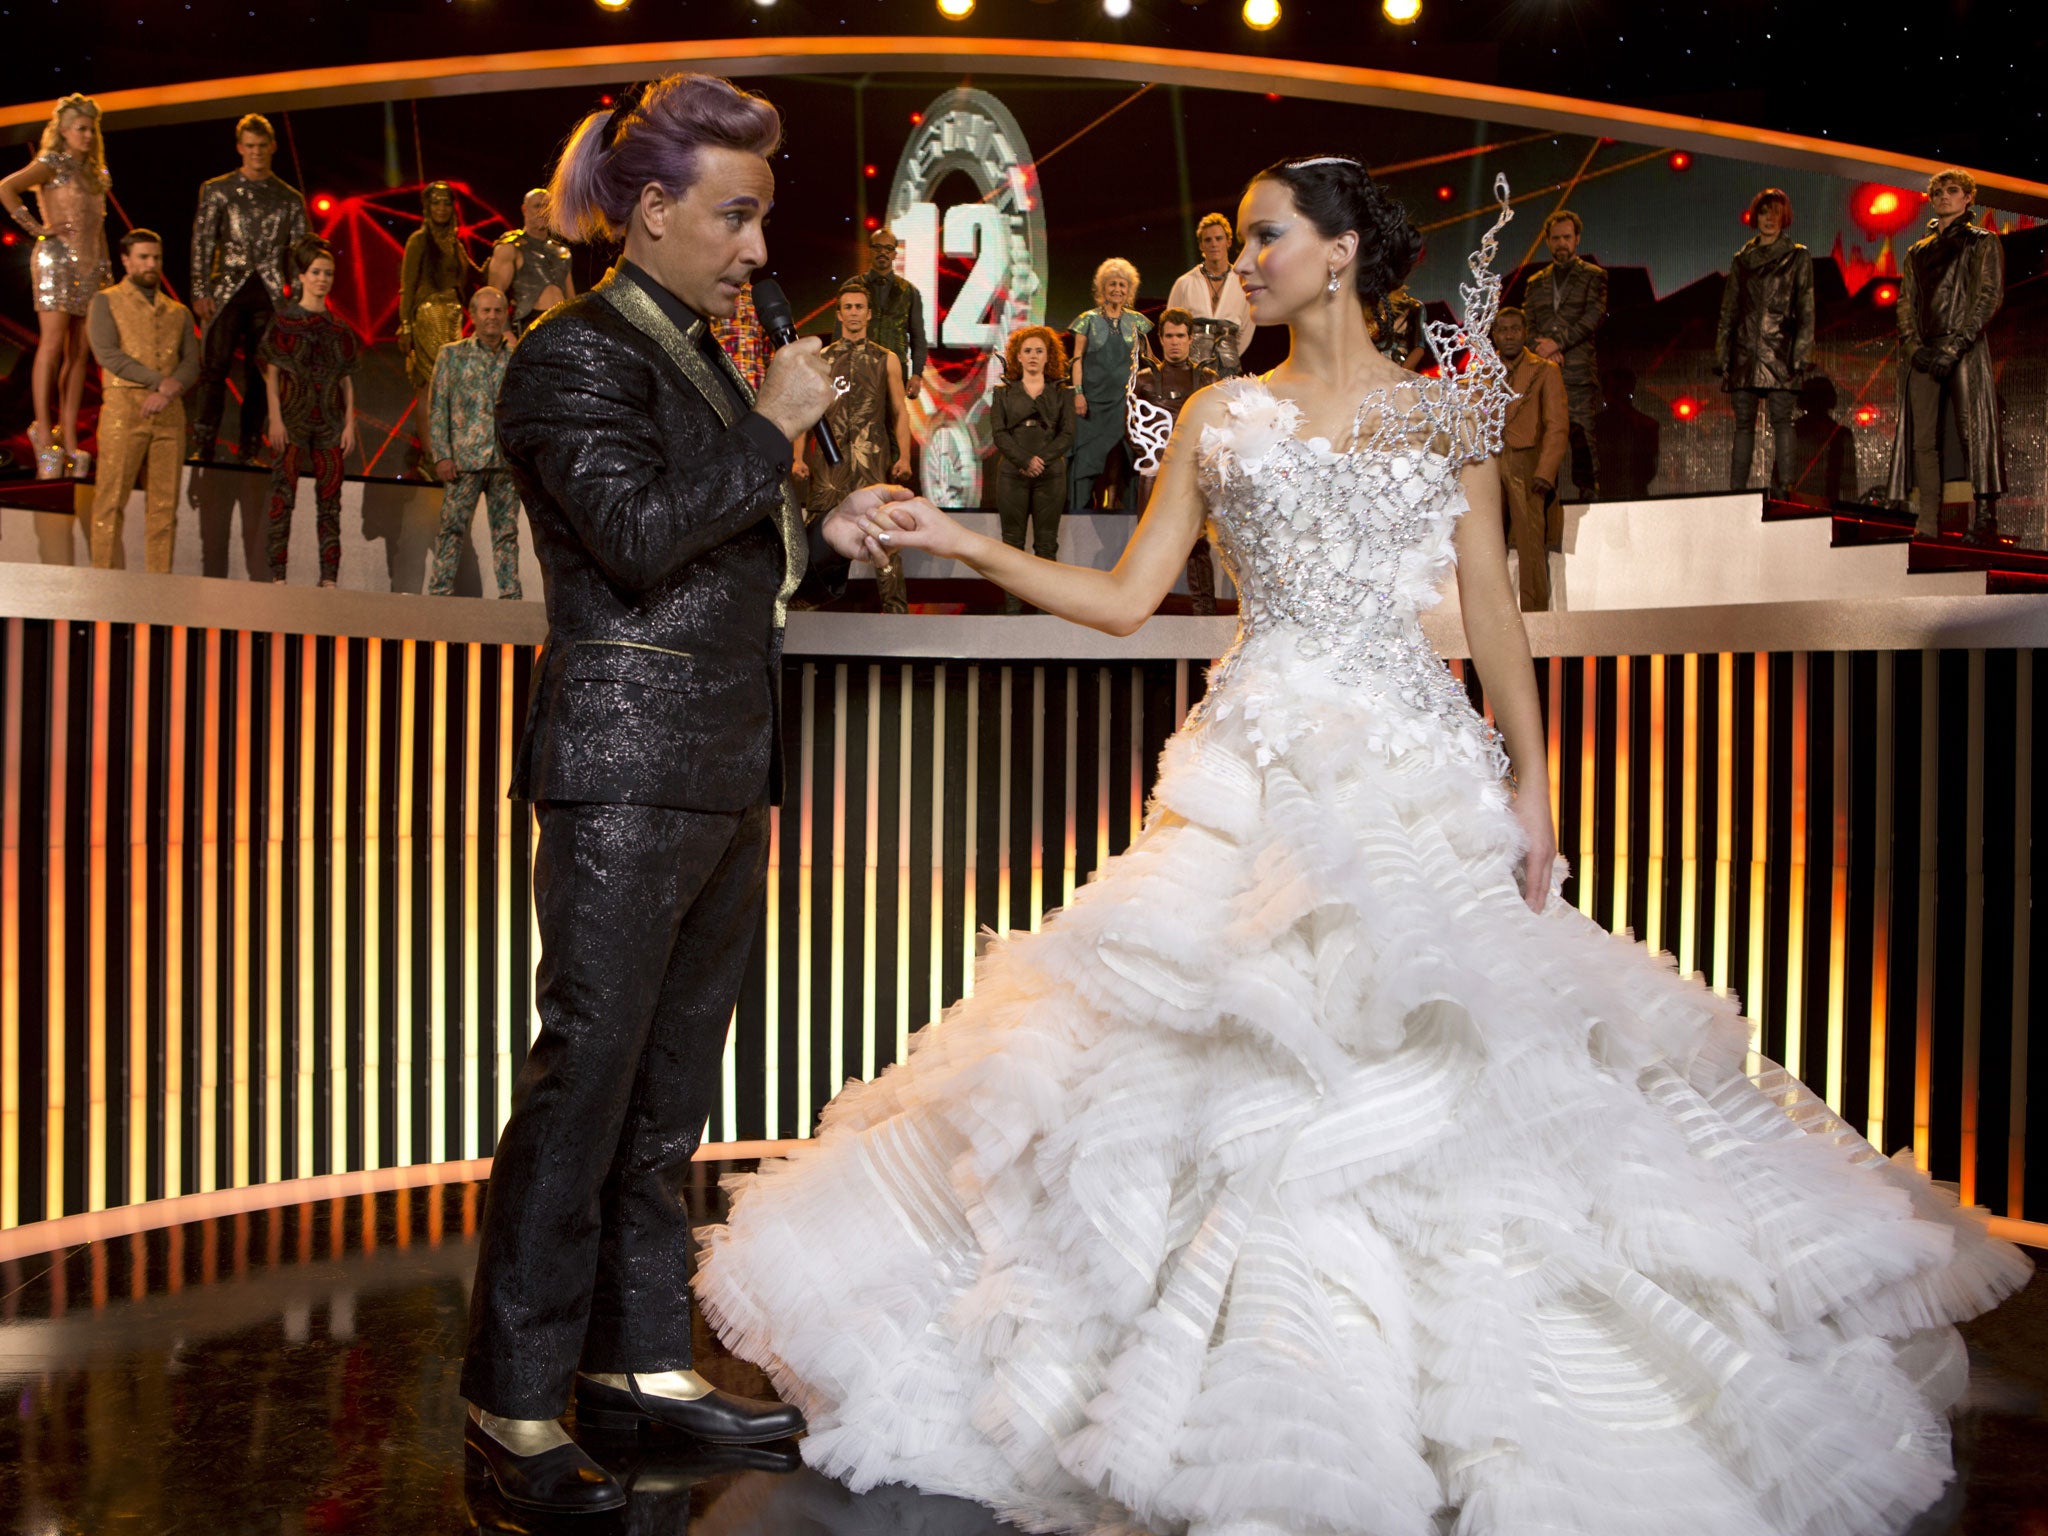 Glad hand: Stanley Tucci and Jennifer Lawrence in 'Hunger Games: Catching Fire'